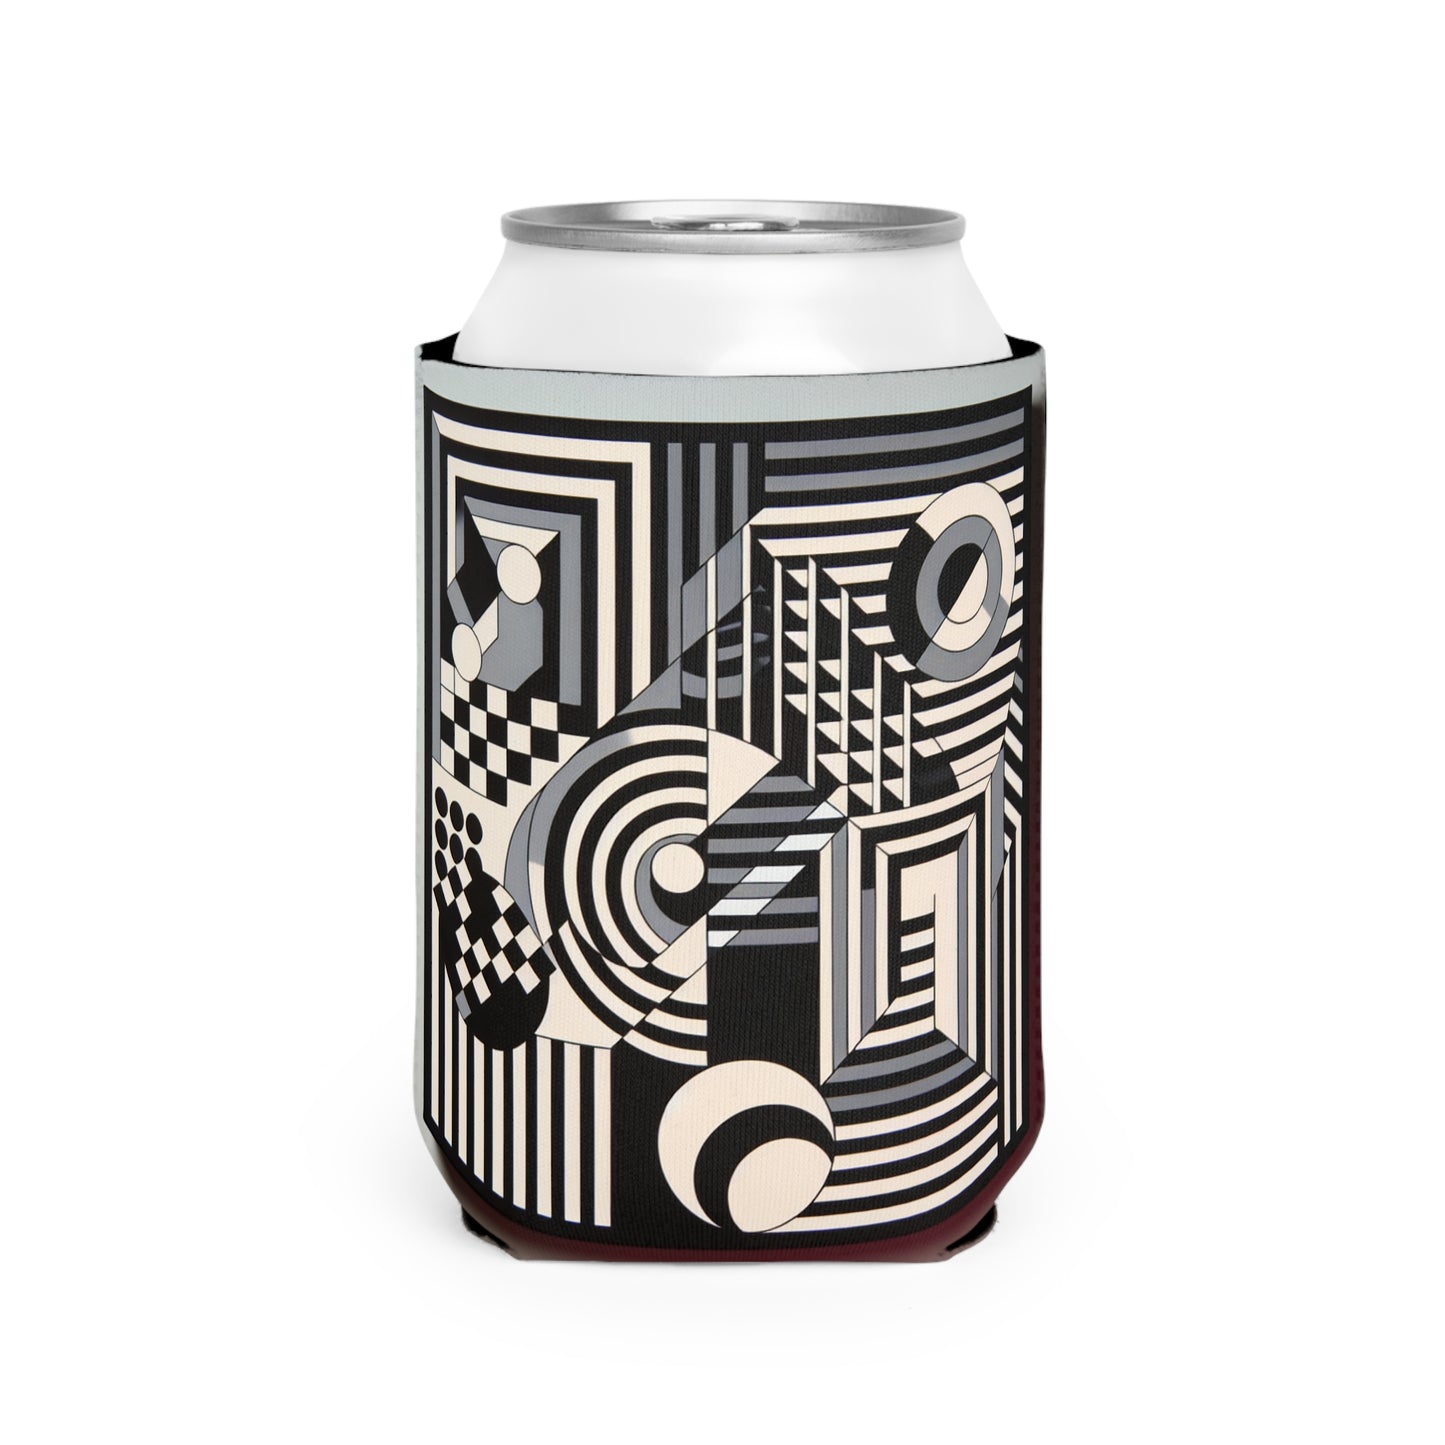 "Mesmerize: Bold Op Art Geometry in Black and White" - The Alien Can Cooler Sleeve Op Art